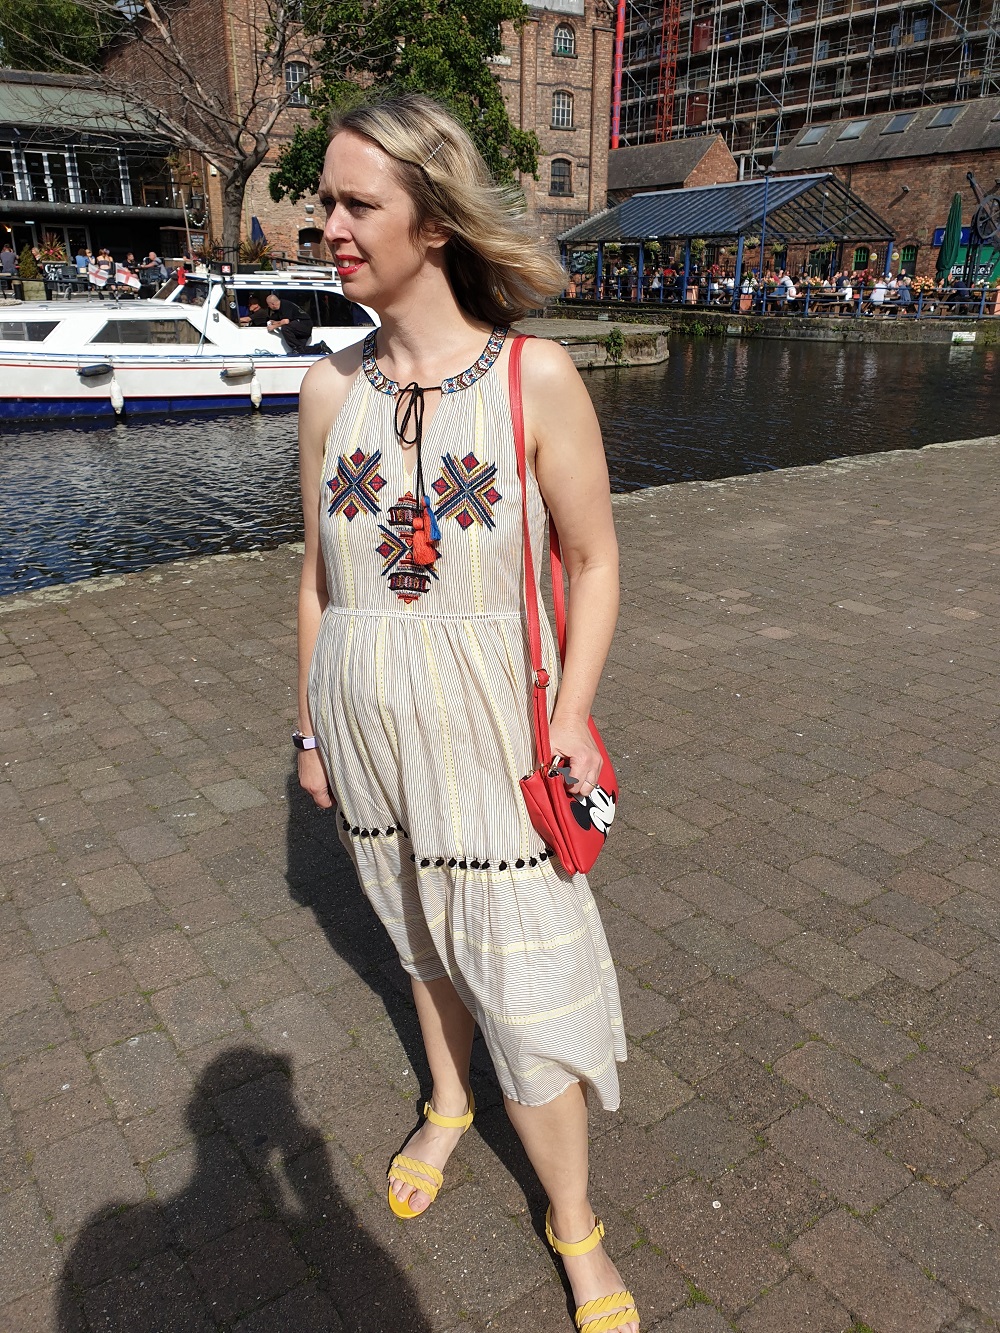 Summer Maxi Dress From Not Last Year But The Year Before!